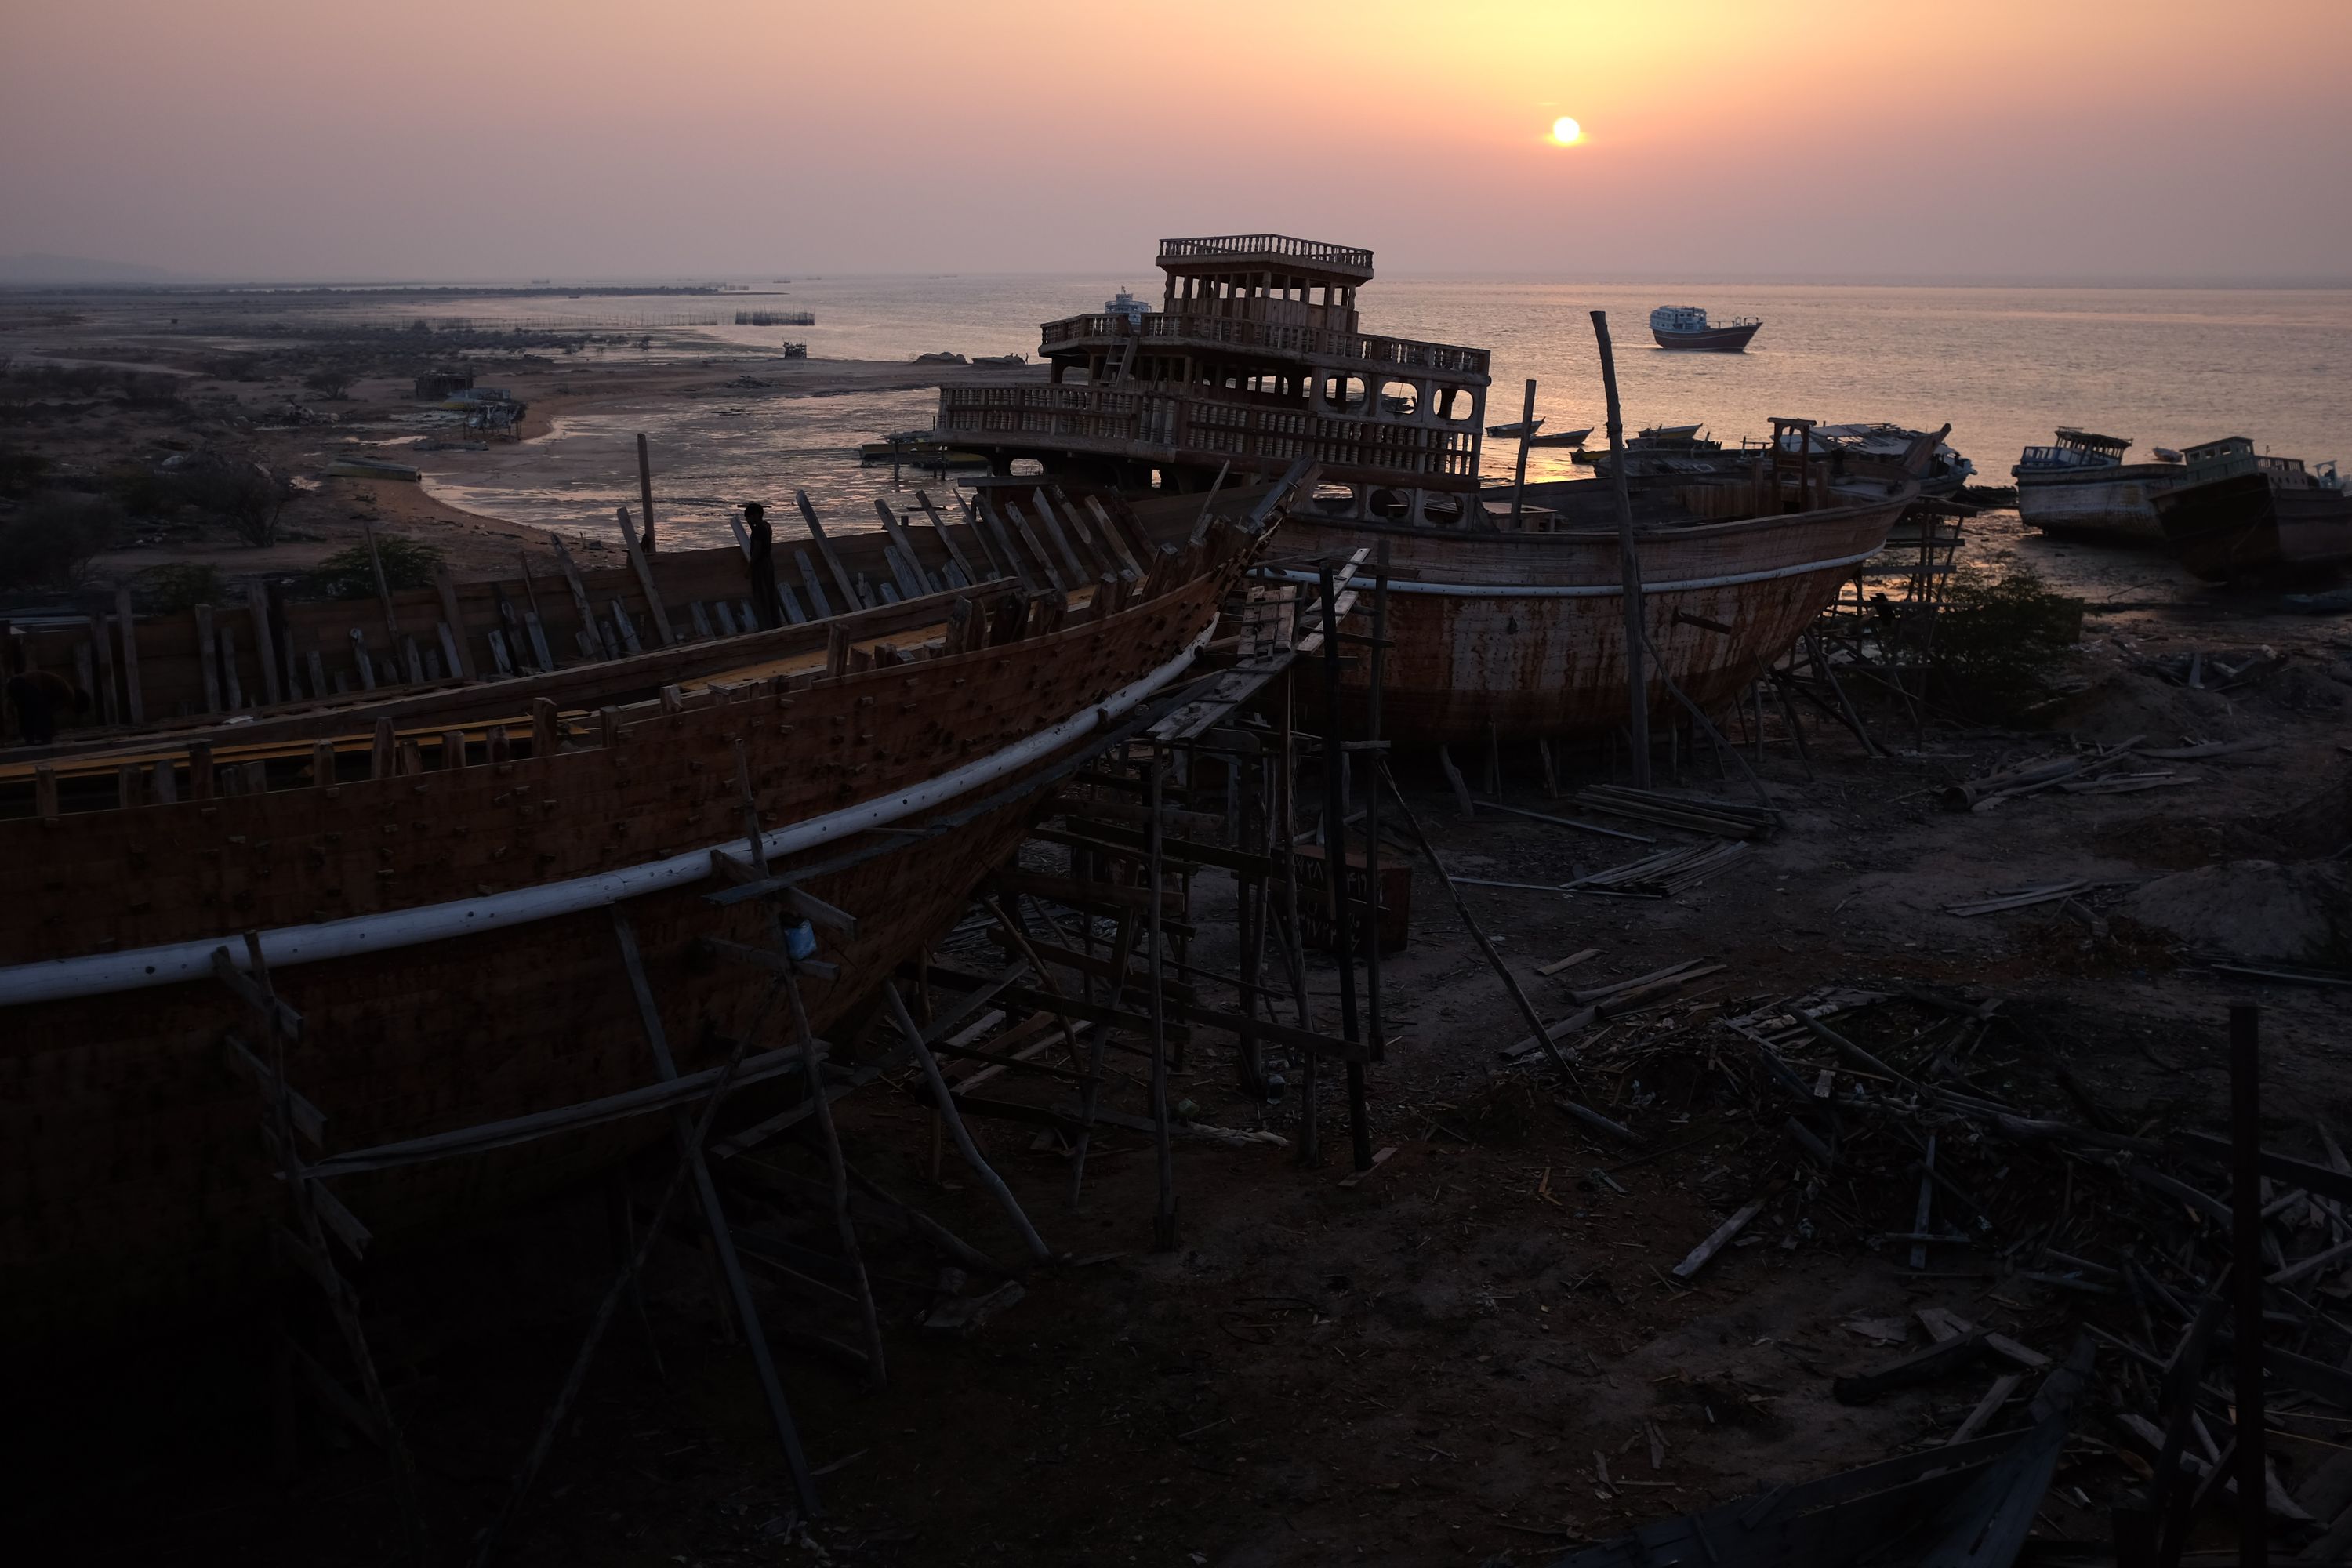 Two Arabian-looking boats under construction on the shore, with a completed one floating by in the sunset.